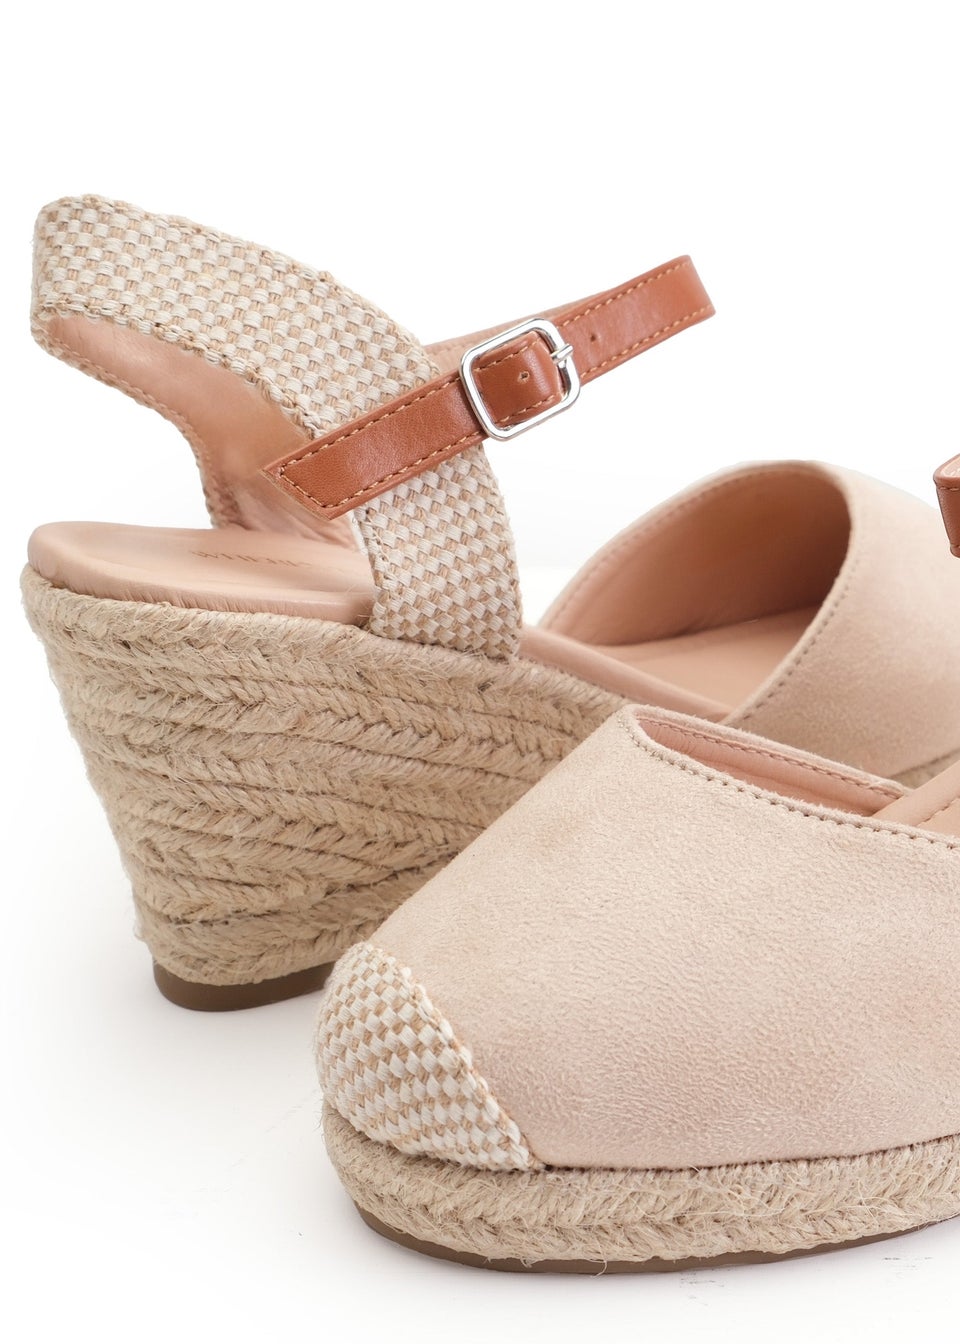 Where's That From Beige Suede Blakely Low Wedge Espadrille Sandals